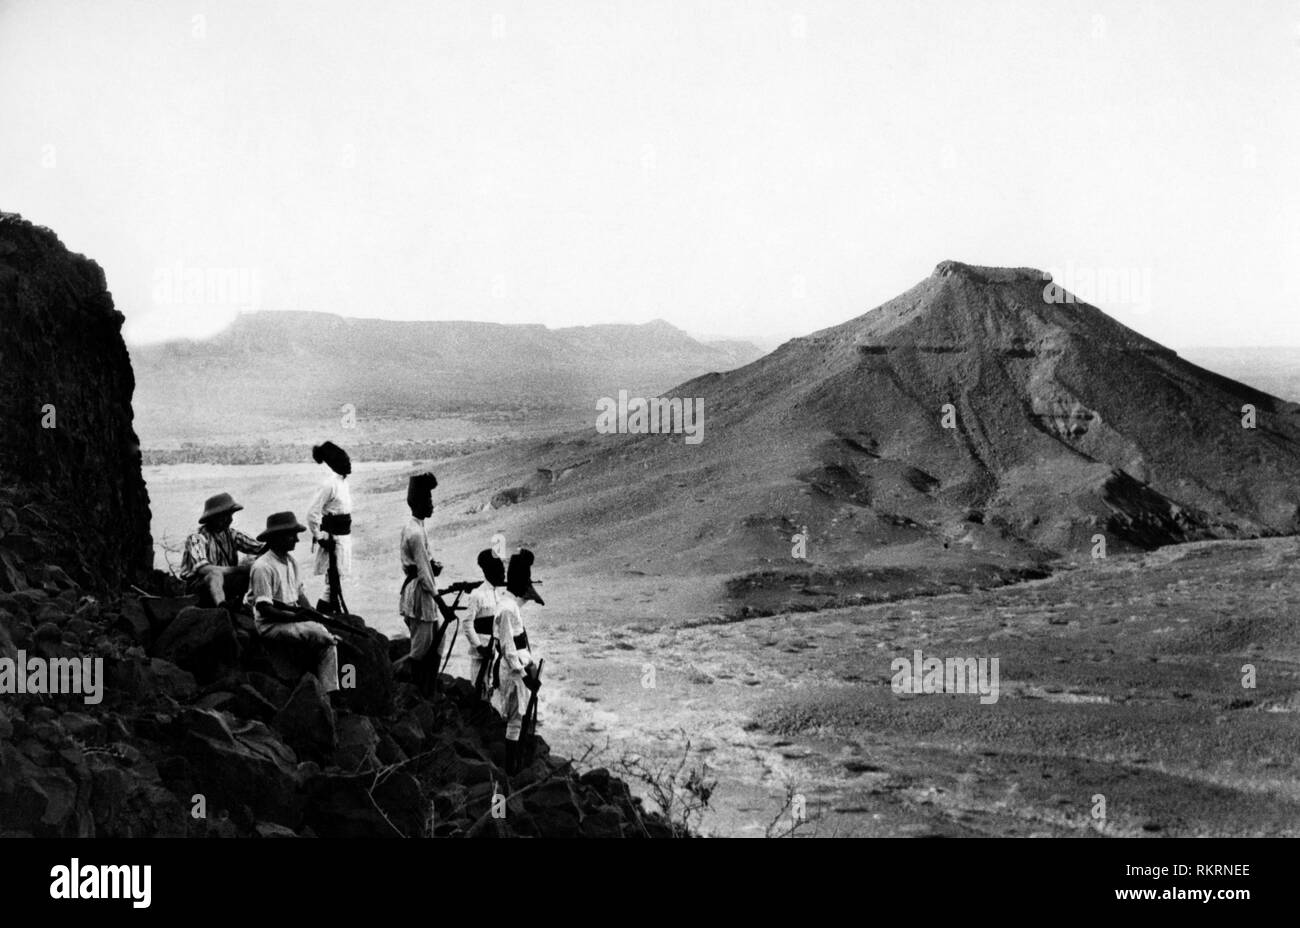 Eritrea people Black and White Stock Photos & Images - Alamy